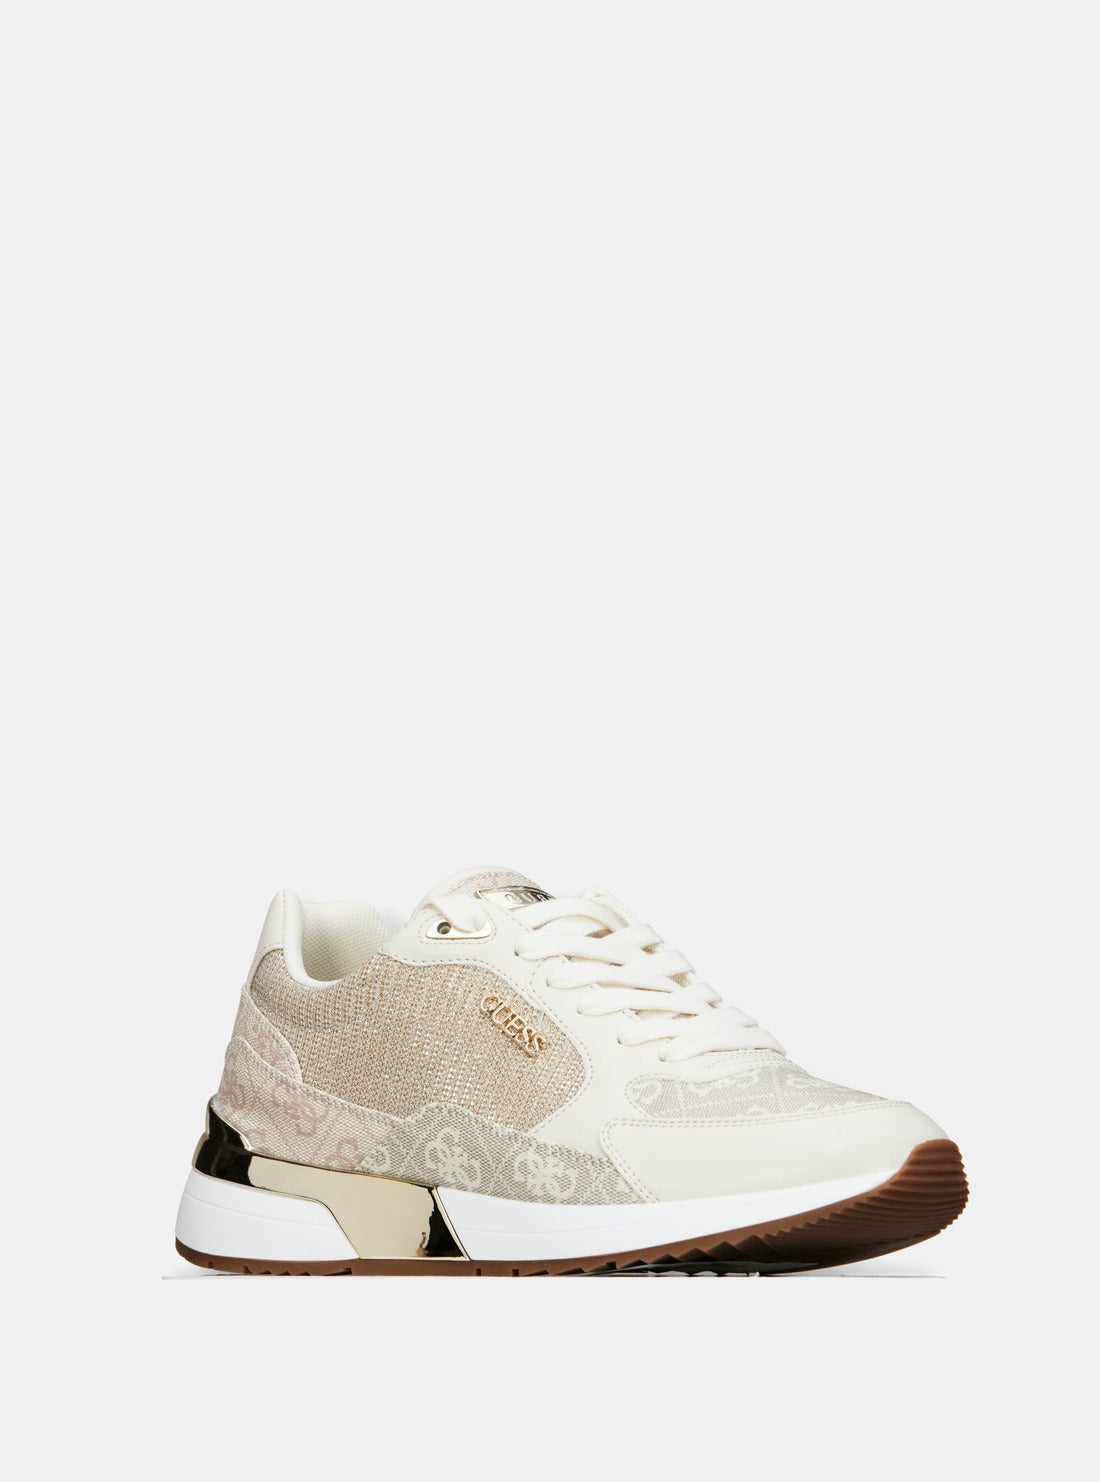 GUESS Cream Logo Low-Top Sneakers front view